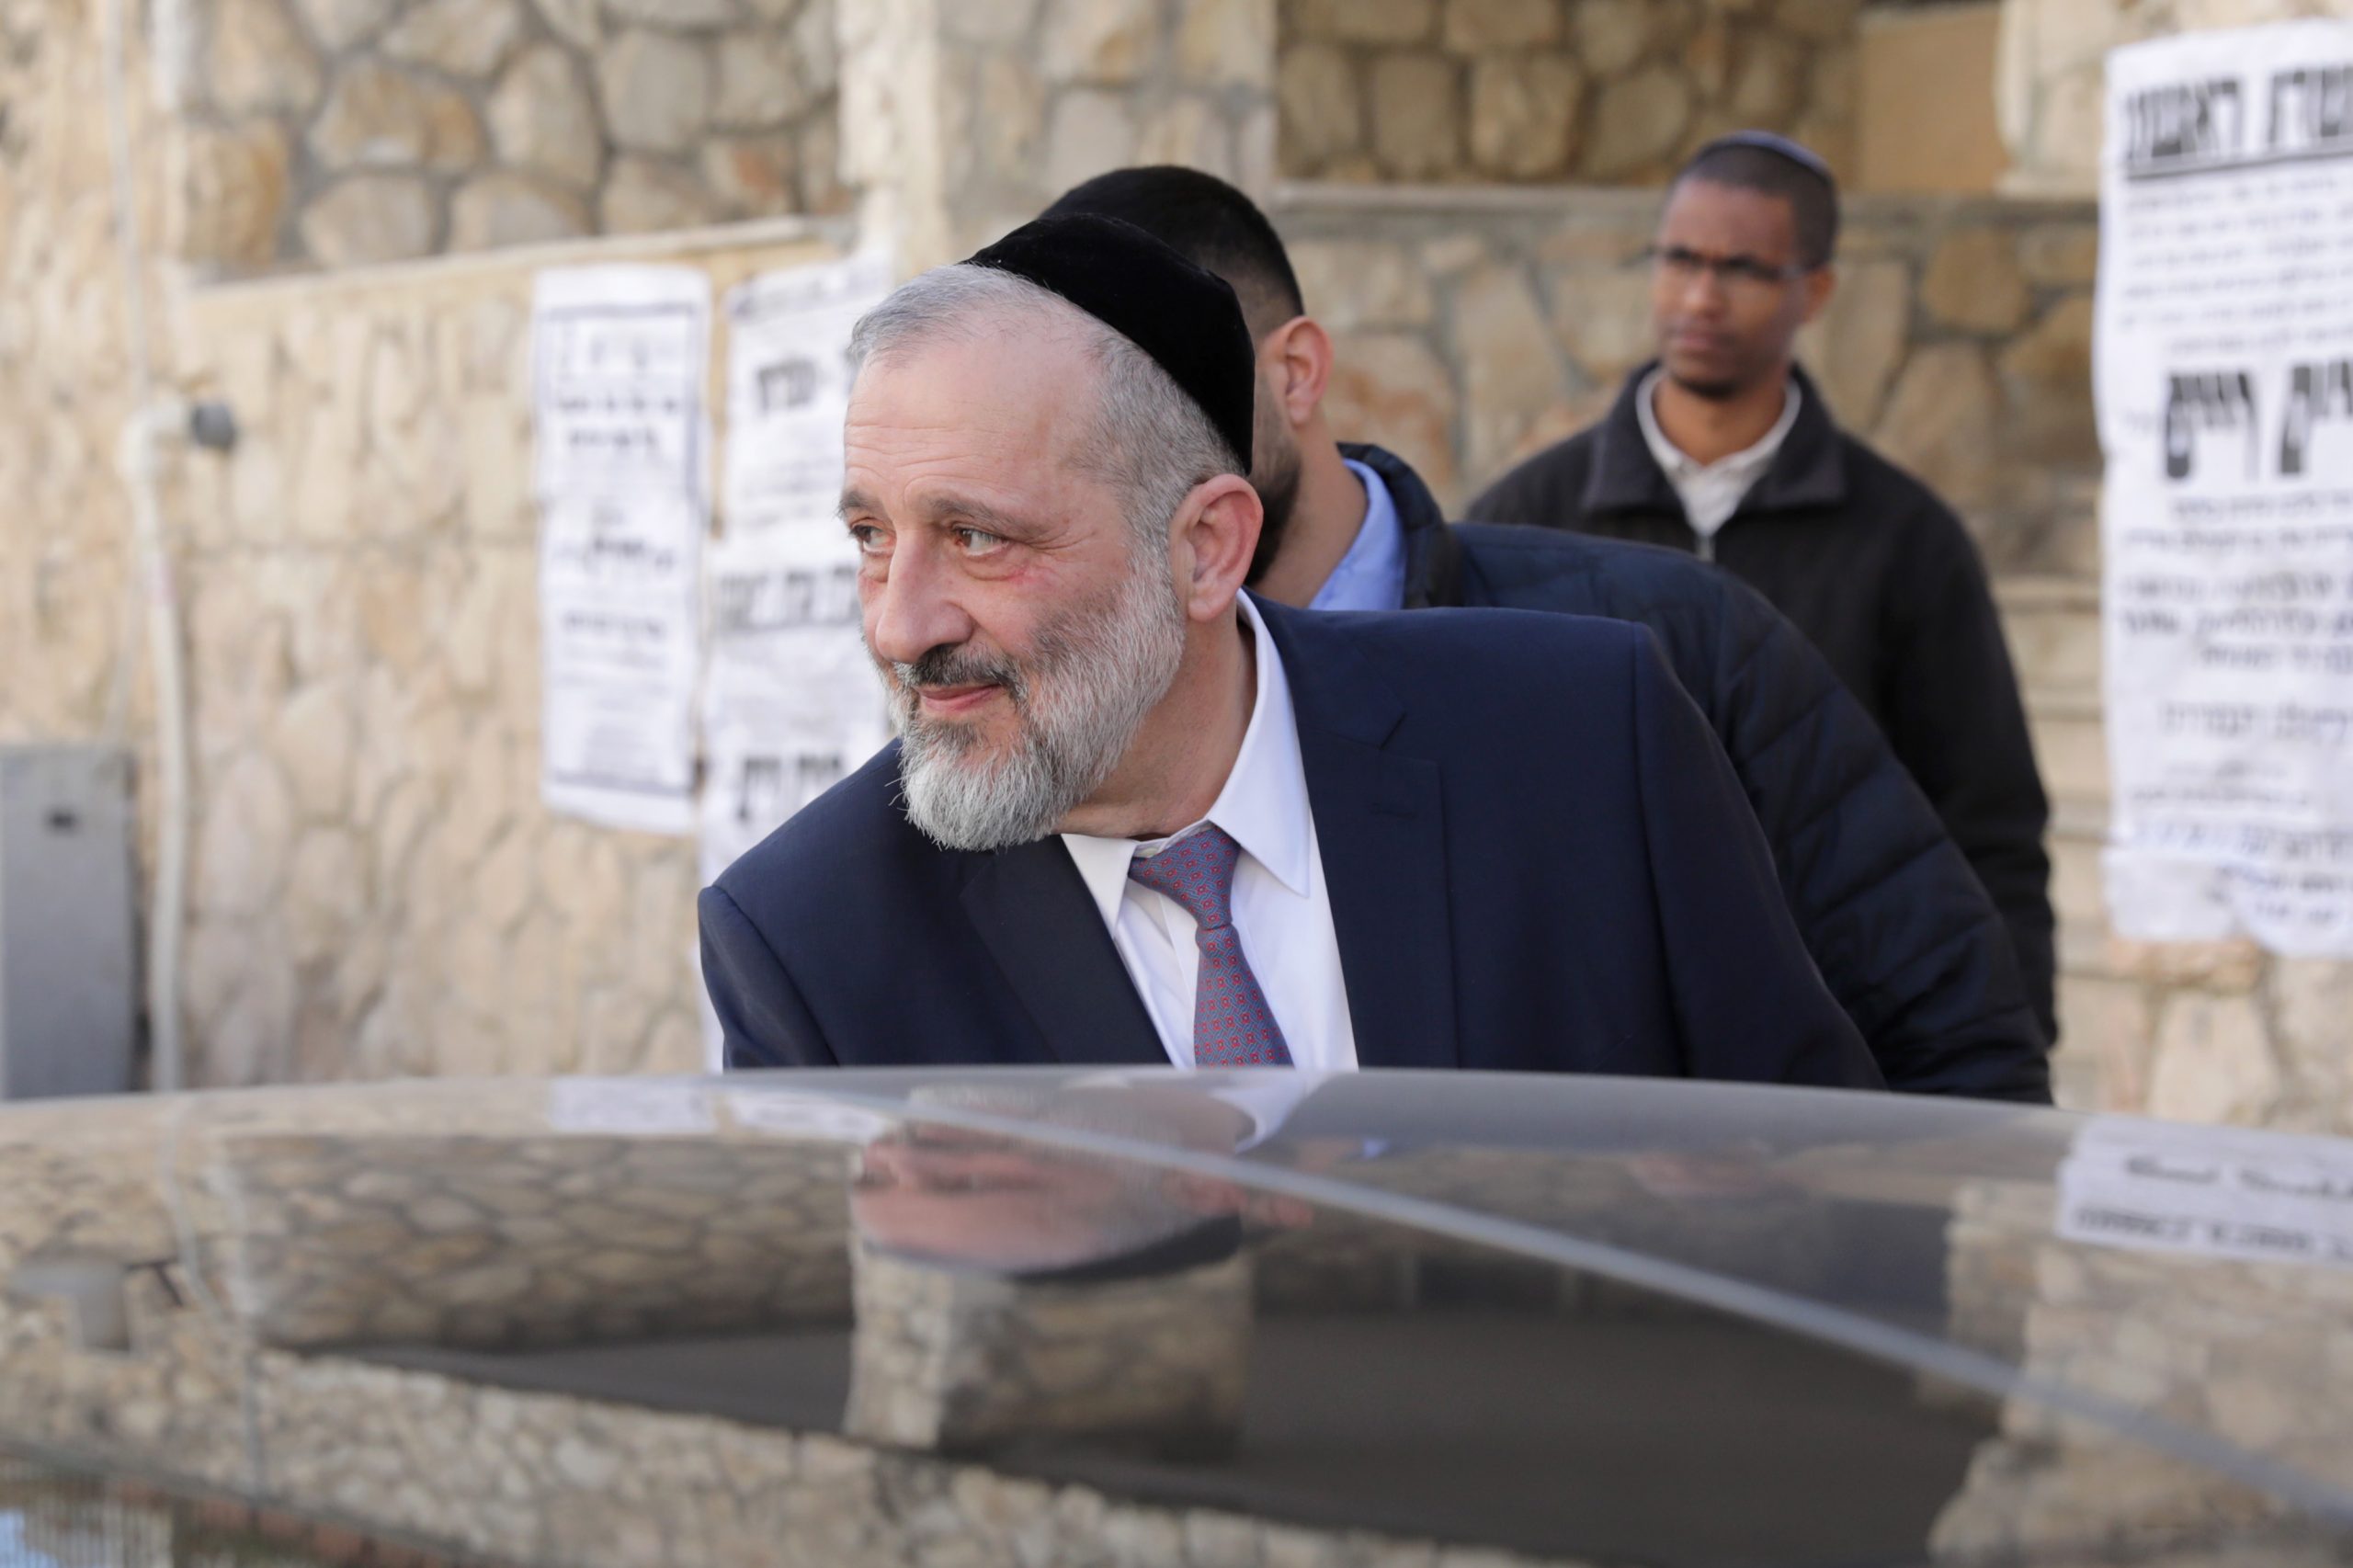 epa10422184 Israeli politician Aryeh Deri, who was appointed as Minister of Interior and Health leaves his house in Jerusalem, 22 January 2023. The Israeli Supreme Court ruled on 18 January 2023 that the appointment of Knesset member Rabbi Aryeh Makhlouf Deri to the position of Minister of the Interior and Health cannot stand. According to reports, the court ordered Prime Minister Benjamin Netanyahu to fire Deri from his post today.  EPA/ABIR SULTAN